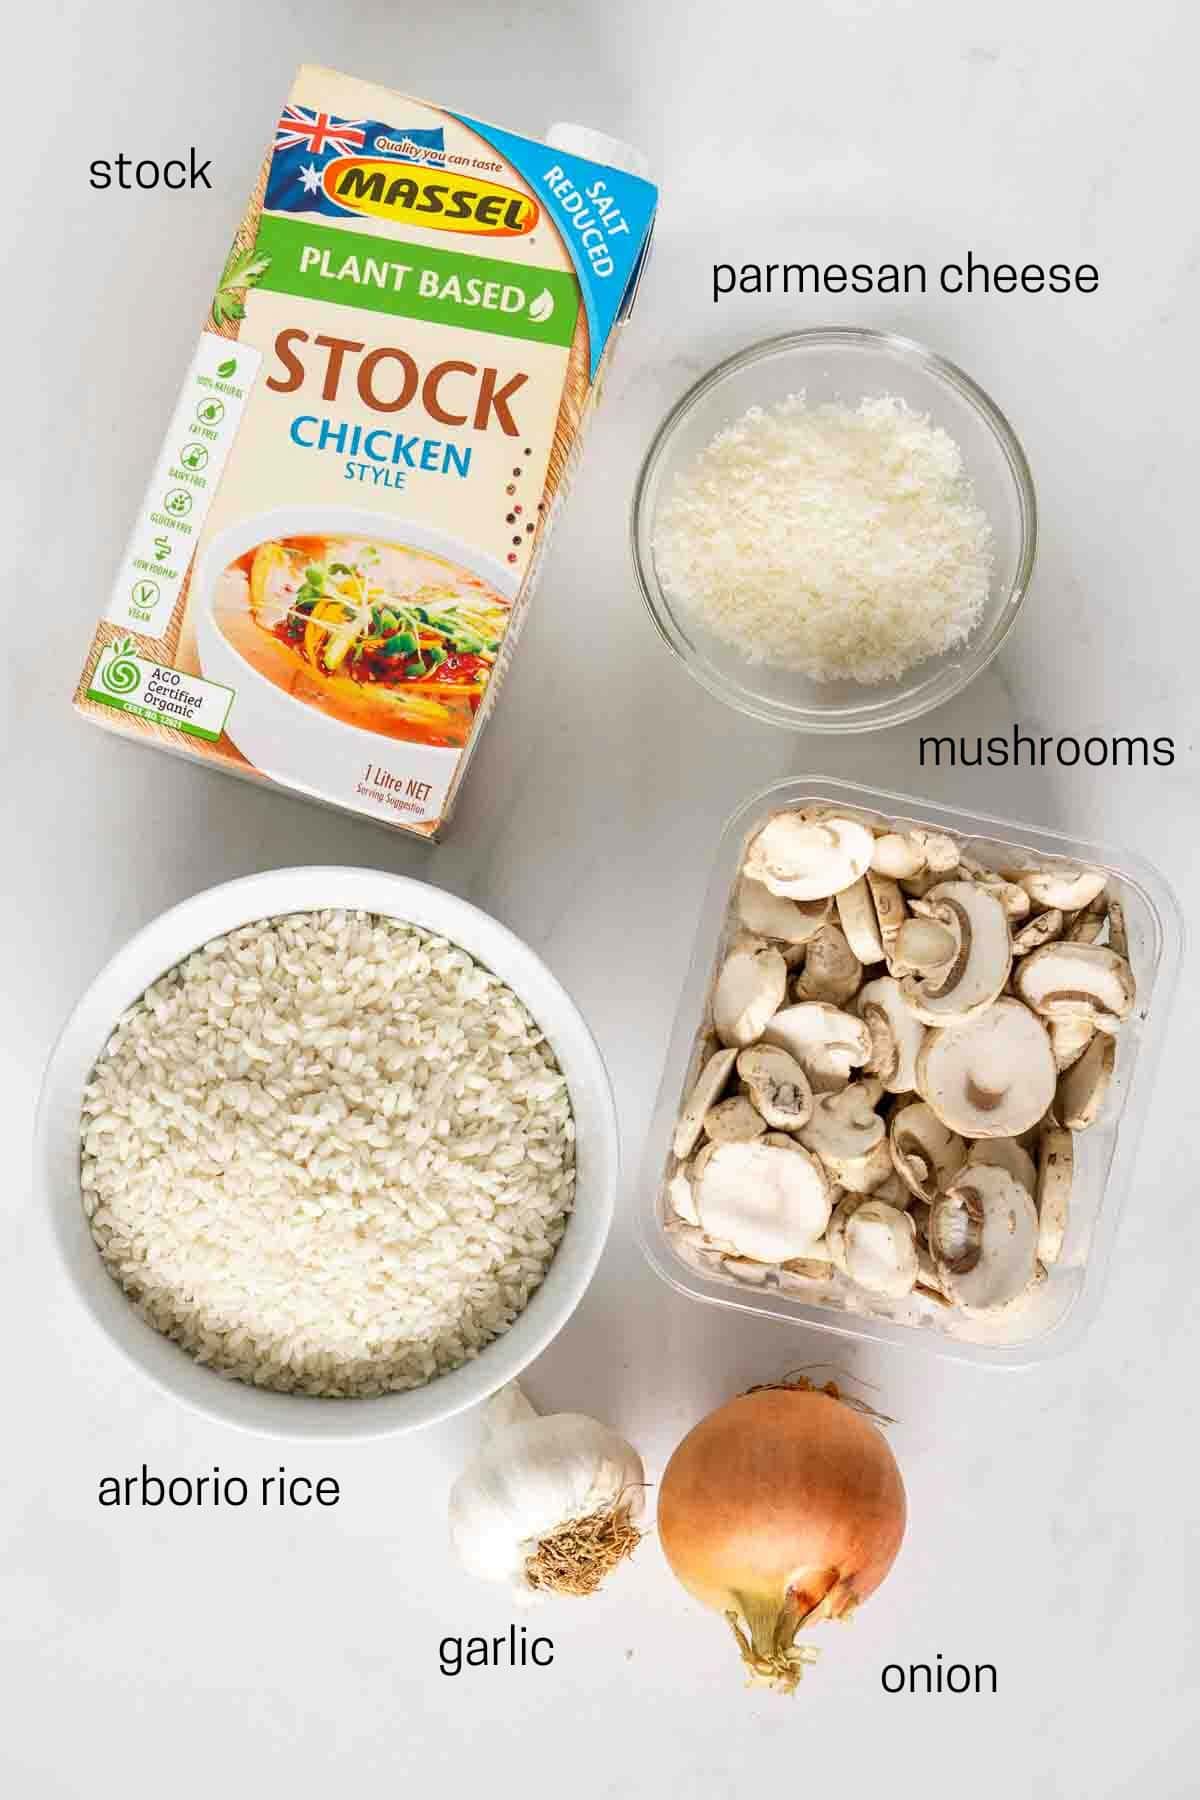 All ingredients needed for pressure cooker mushroom risotto laid out in bowls.